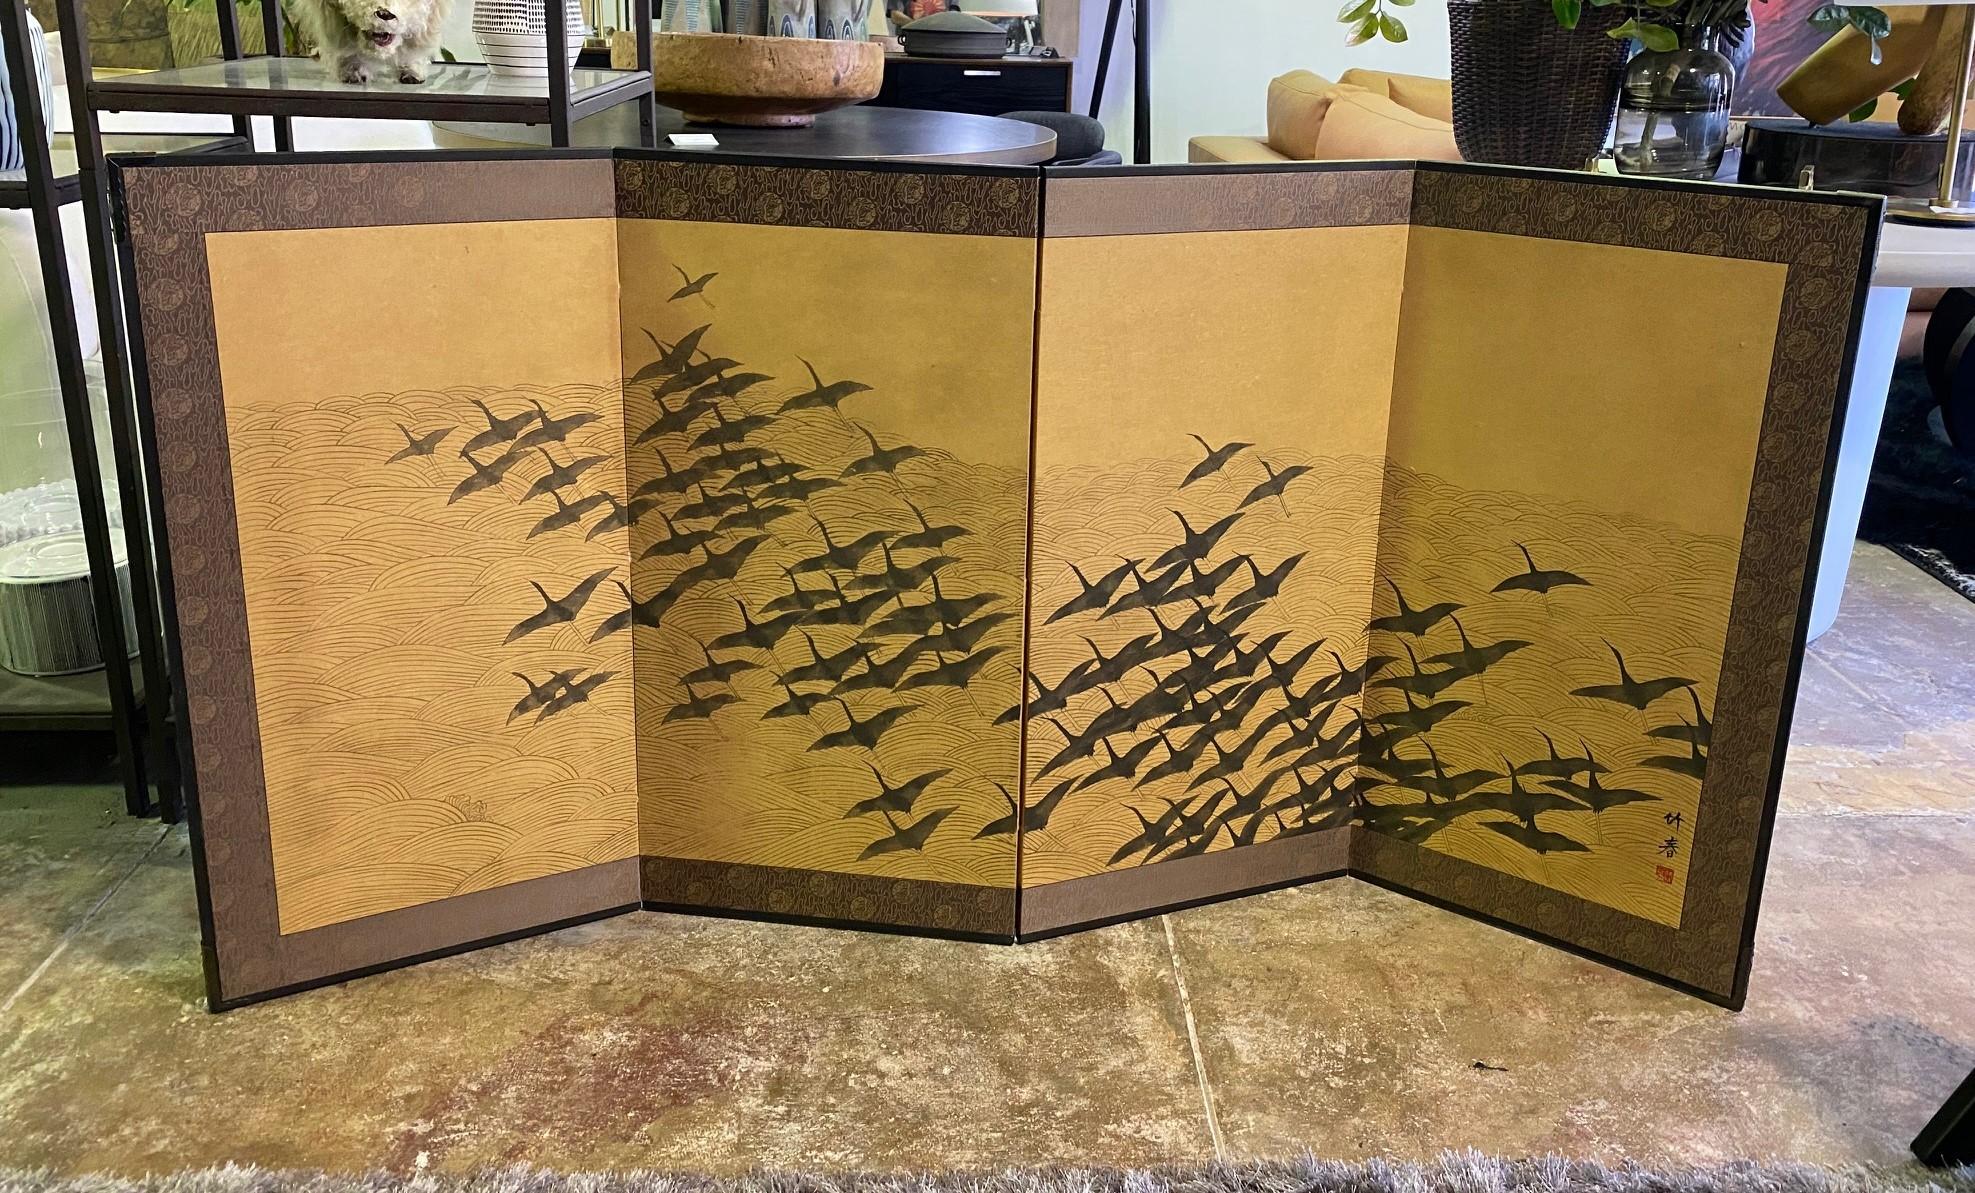 A gorgeous four-panel Japanese Byobu folding screen depicting a flock of silhouetted cranes/birds in flight over a vast oceanic landscape. The screen is subtly and beautifully hand-painted. It is quite an attractive work like no other we have